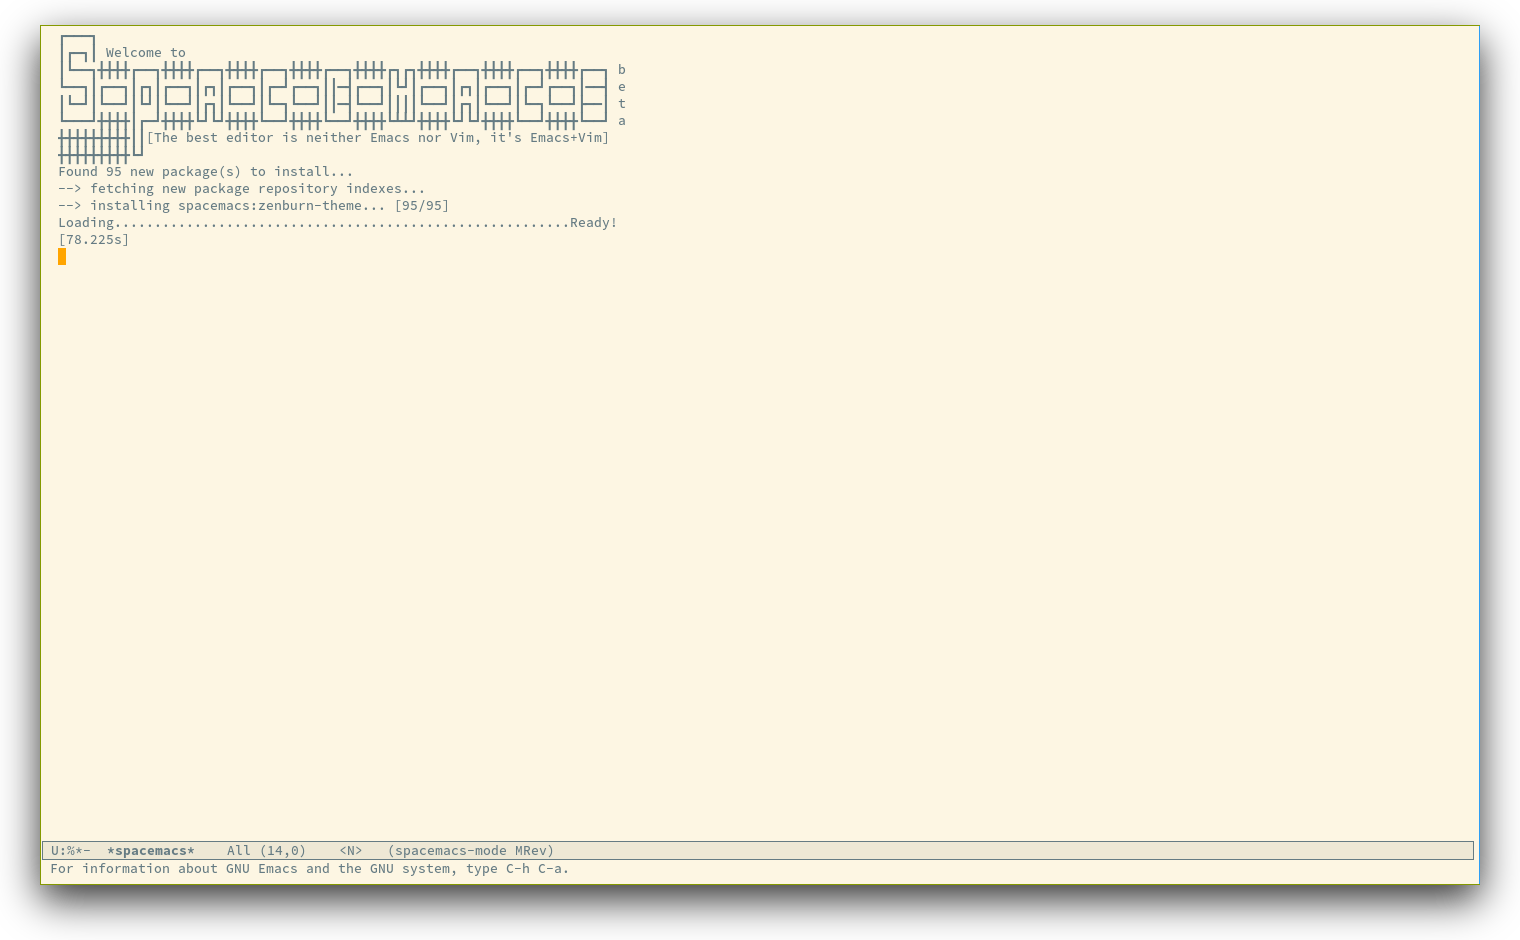 /TakeV/spacemacs/media/commit/3c2475d4aa8e57f67d254648897a63108d16893e/doc/img/spacemacs-startup.png